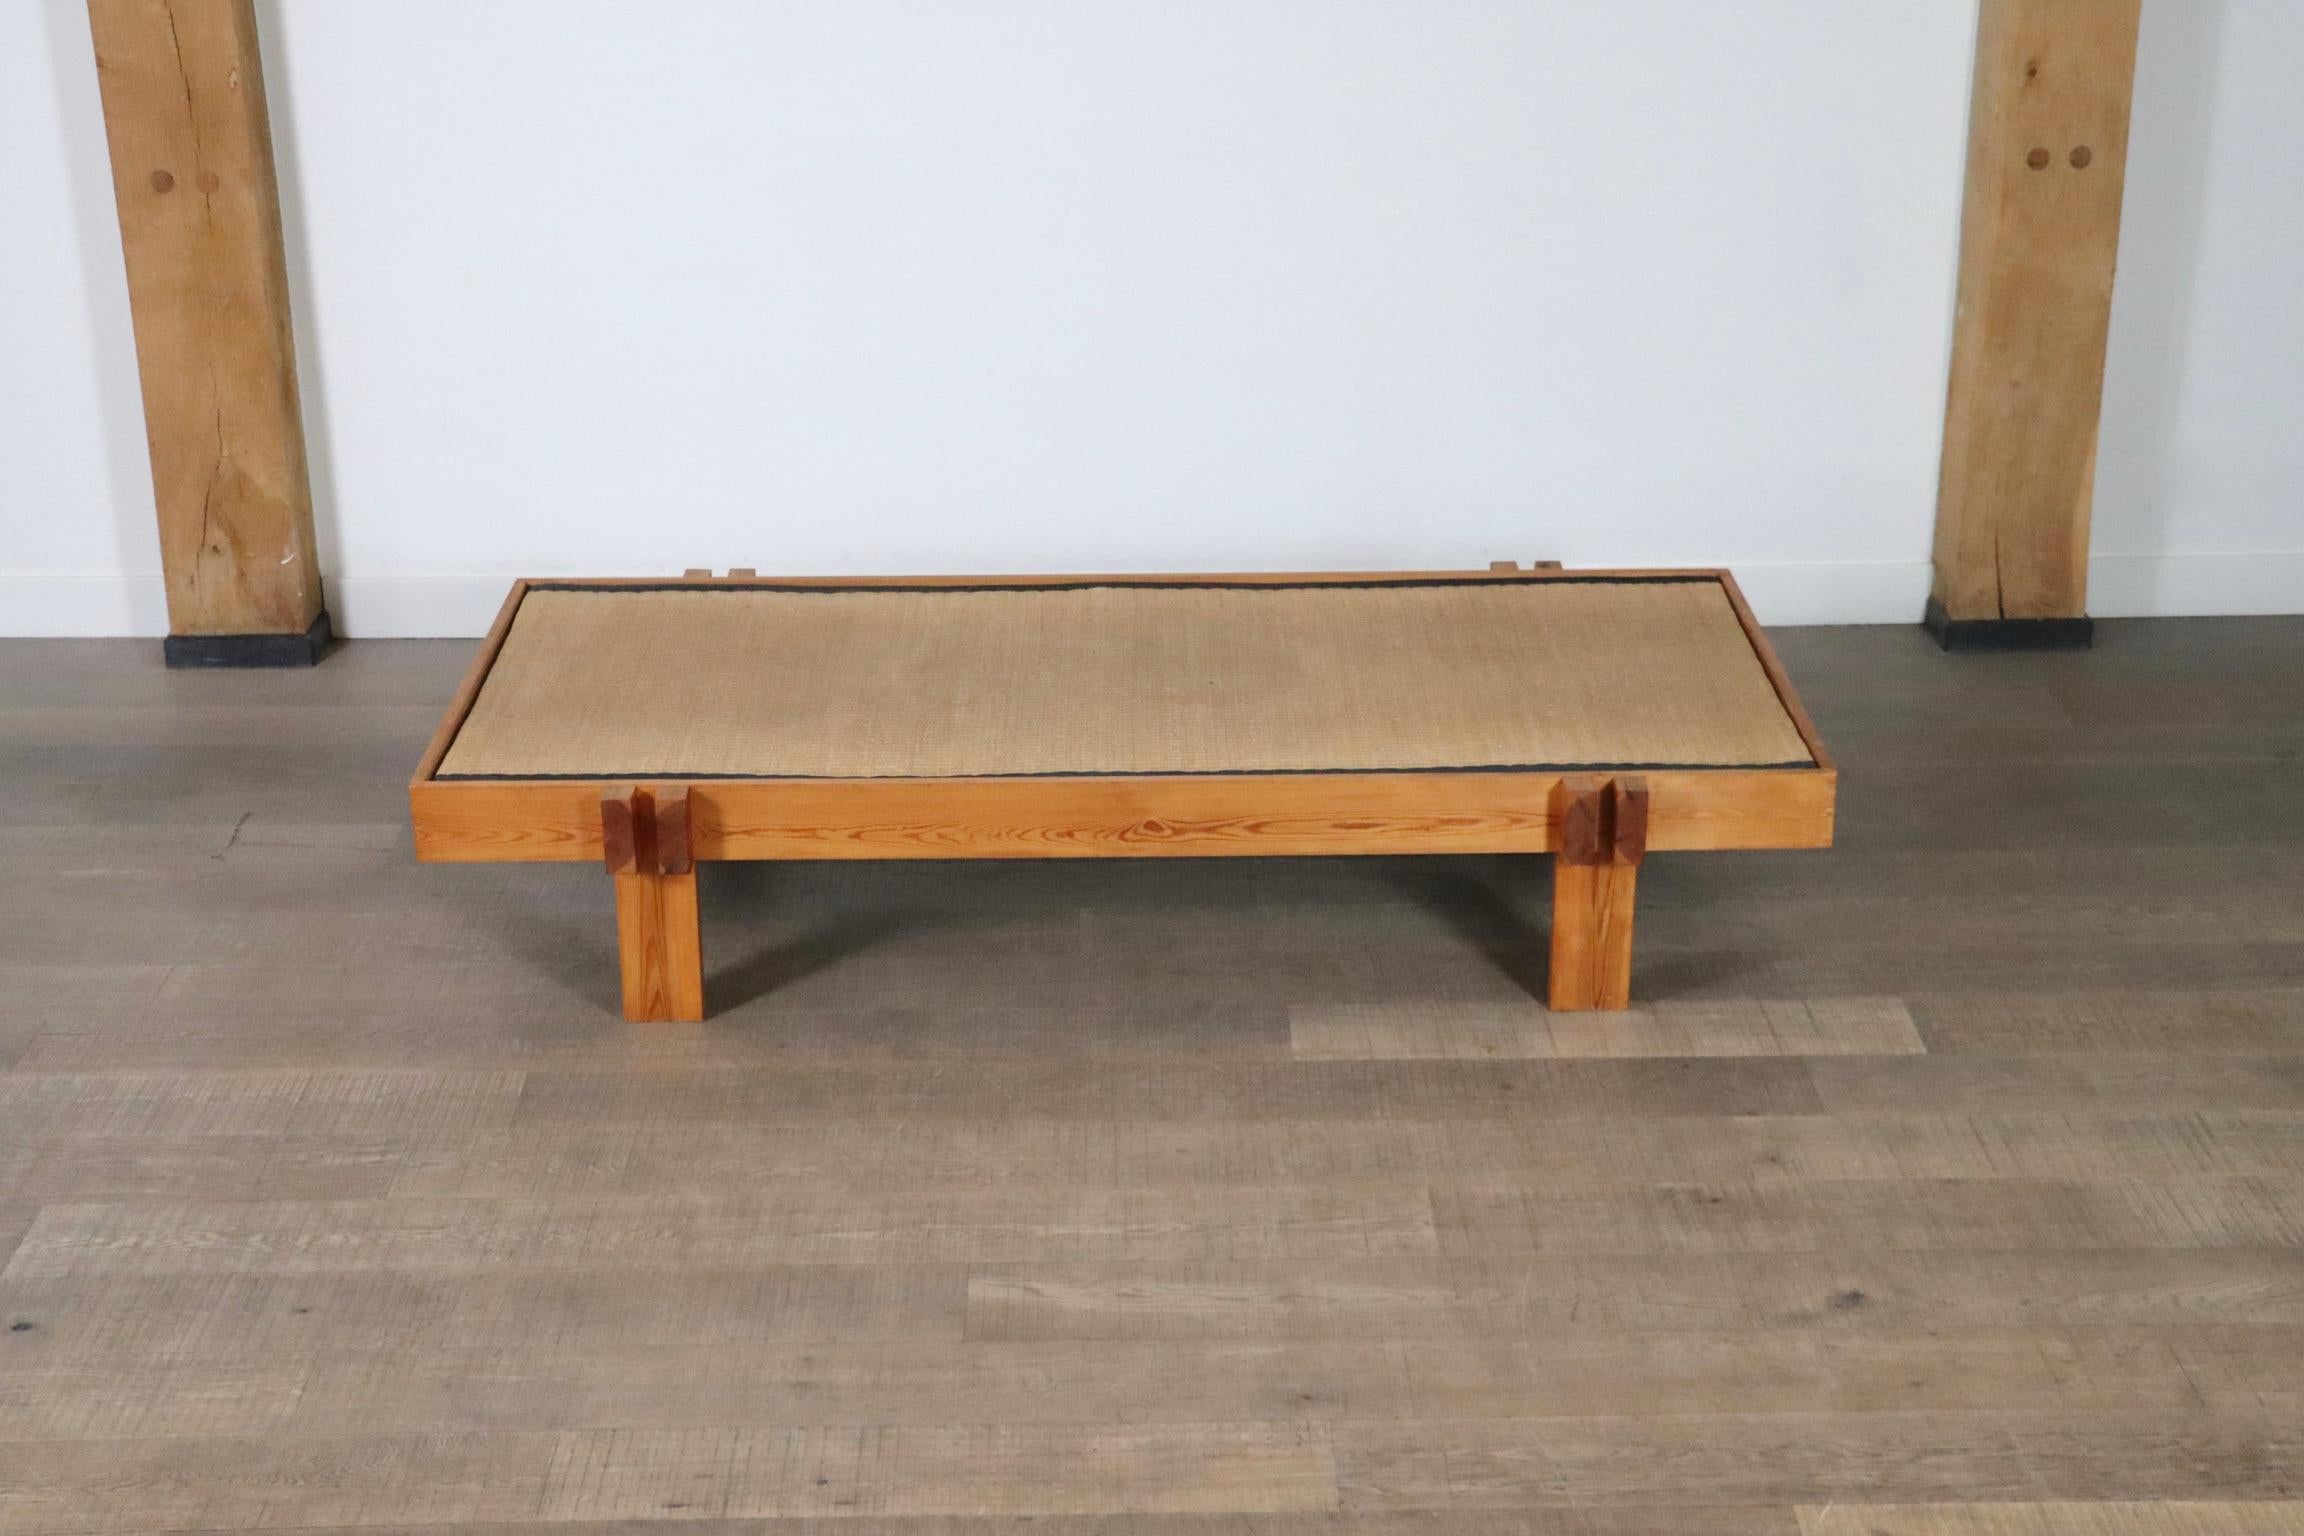 Midcentury Japanese Coffee Table In Wood And Seagrass, Japan, 1960s For Sale 4